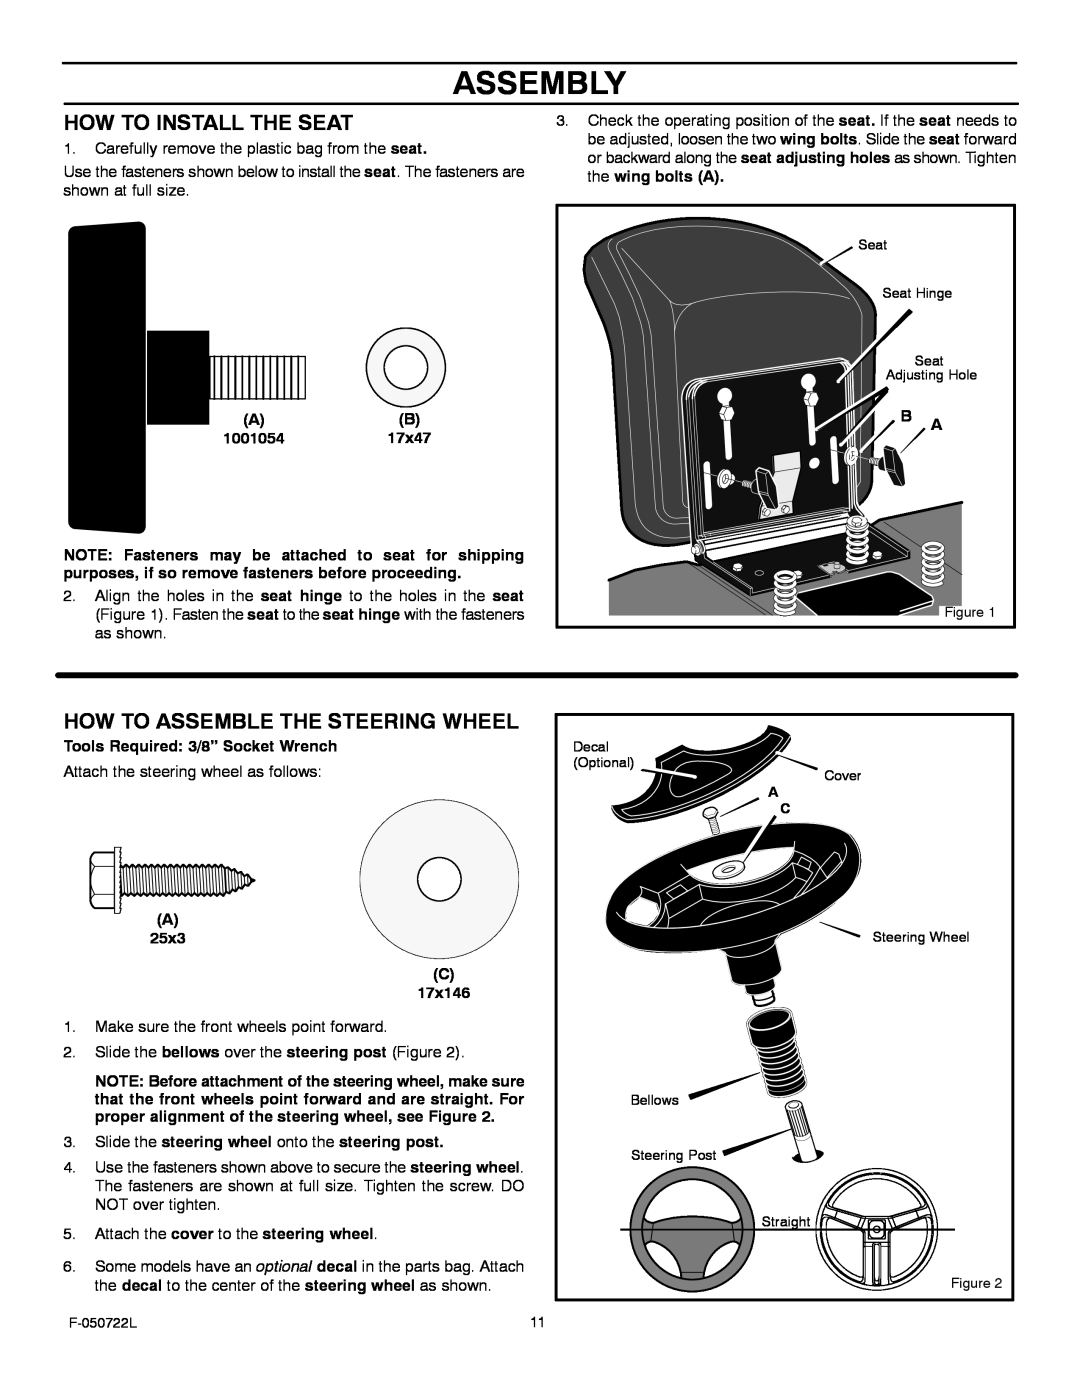 Murray 425001x99A manual Assembly, How To Install The Seat, How To Assemble The Steering Wheel 